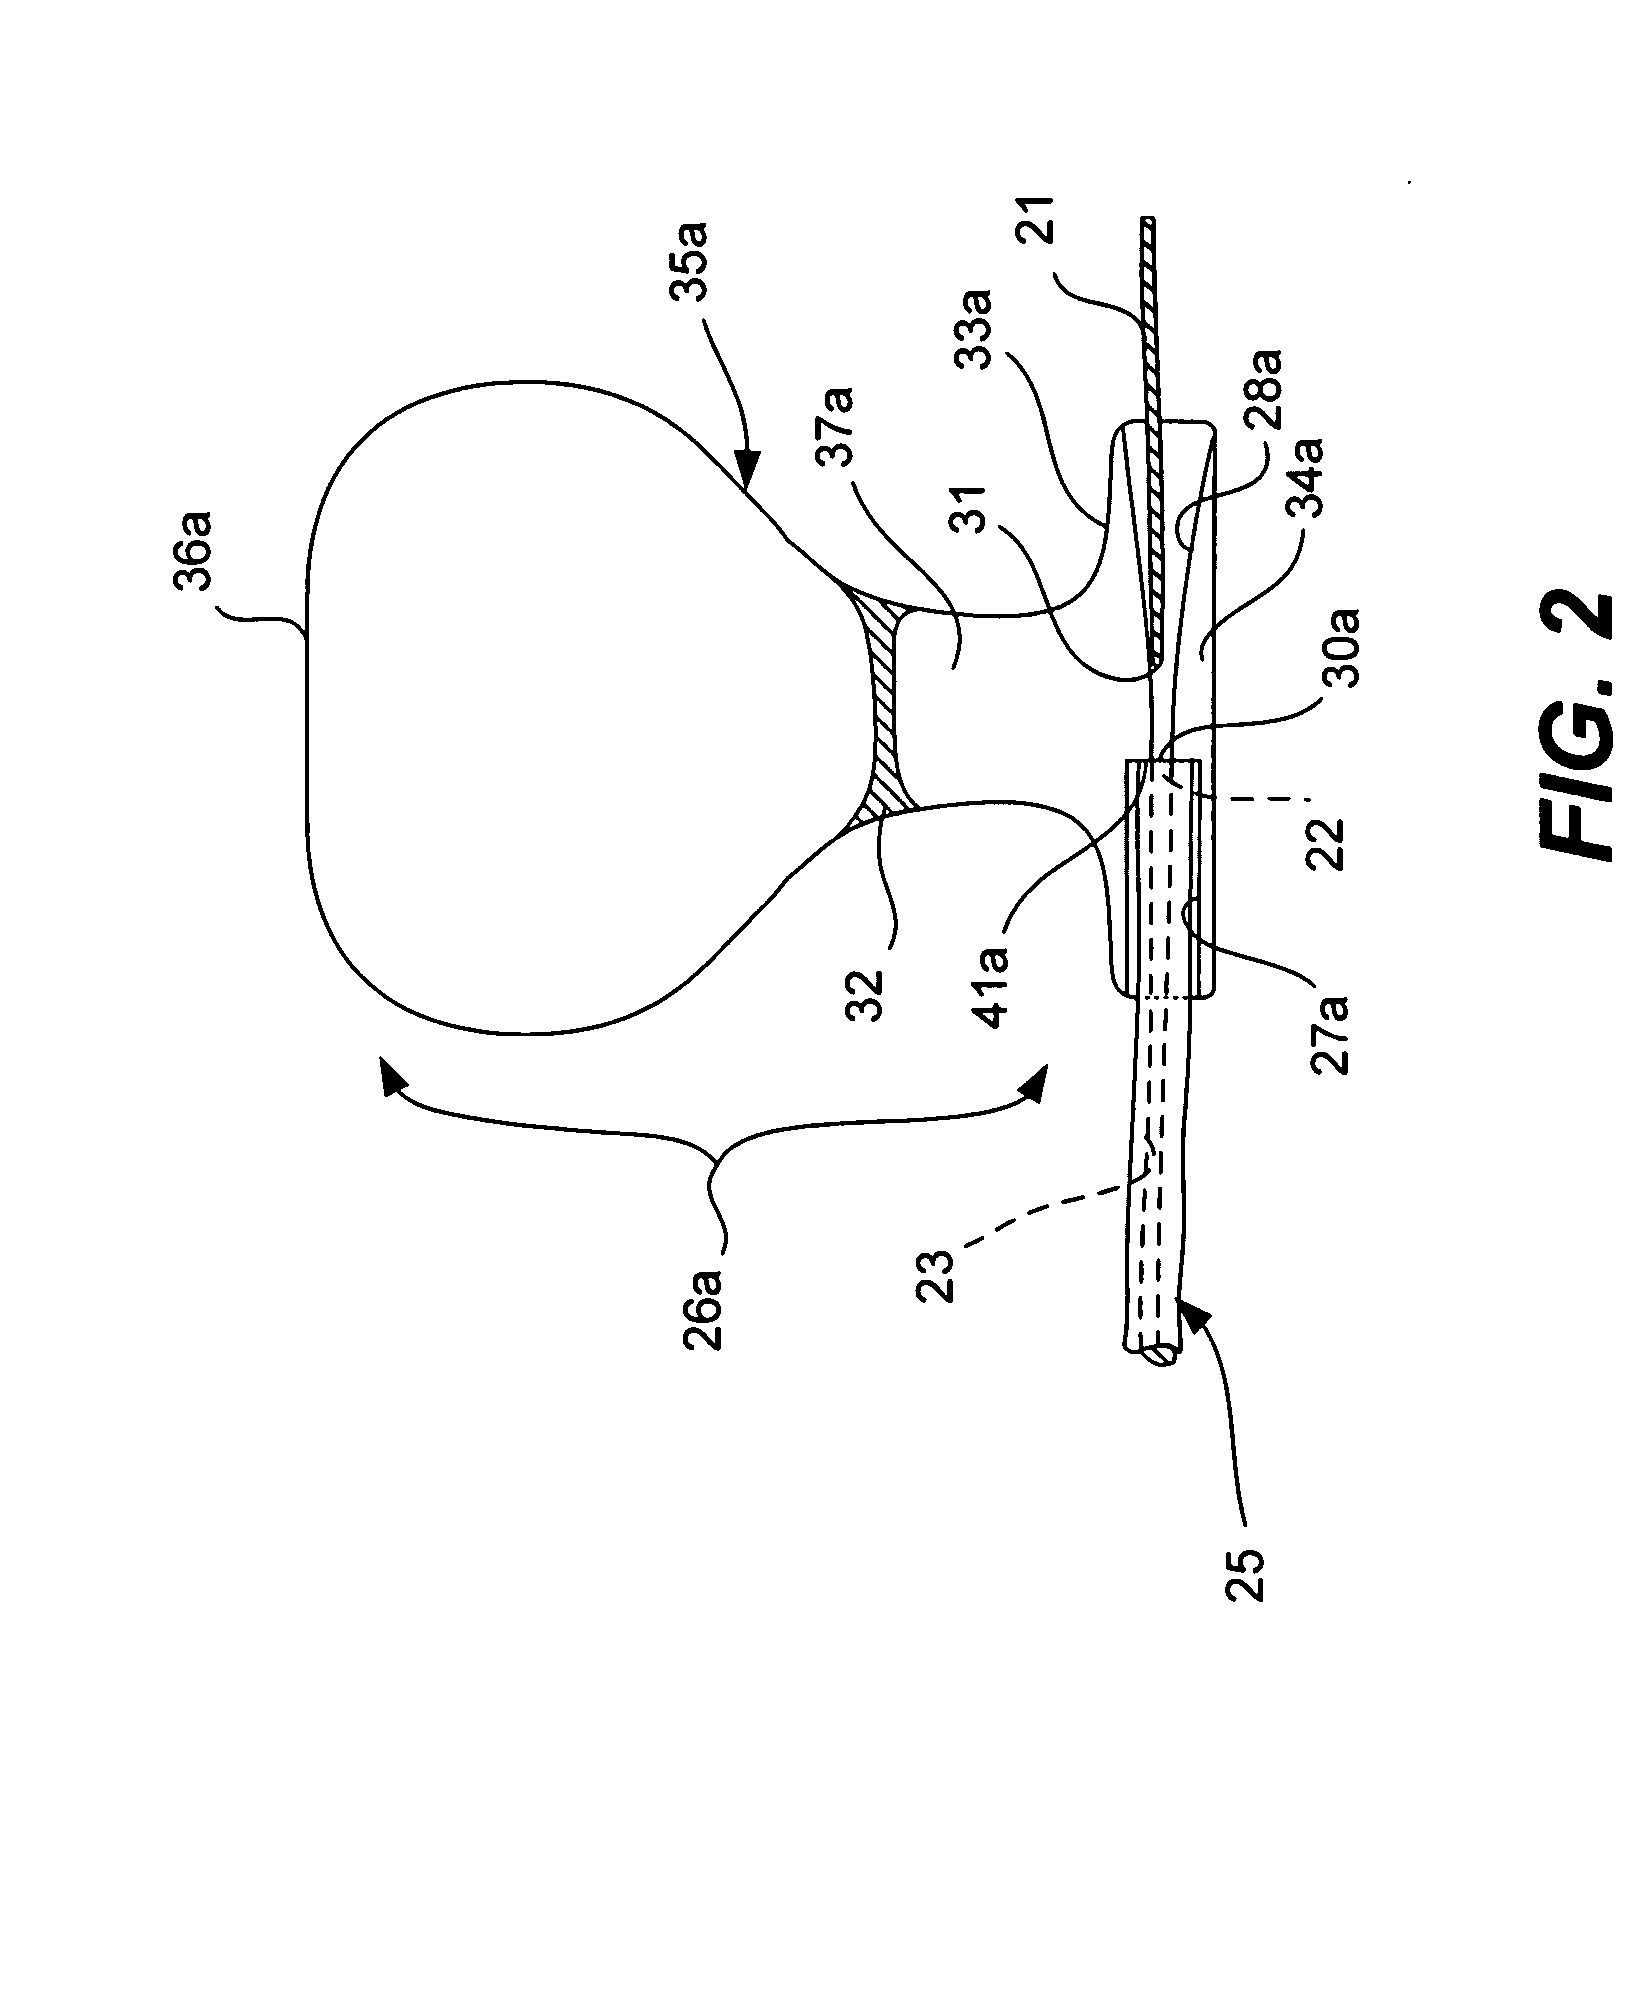 Guidewire loader apparatus and method